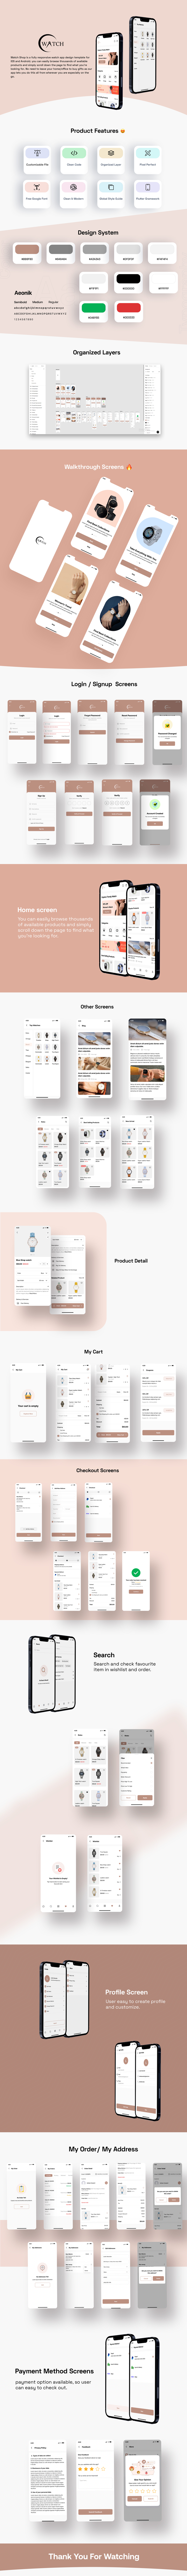 Watch Store App Buy watches - Online Shopping app Flutter 3.x (Android, iOS) app UI template | Smart - 4